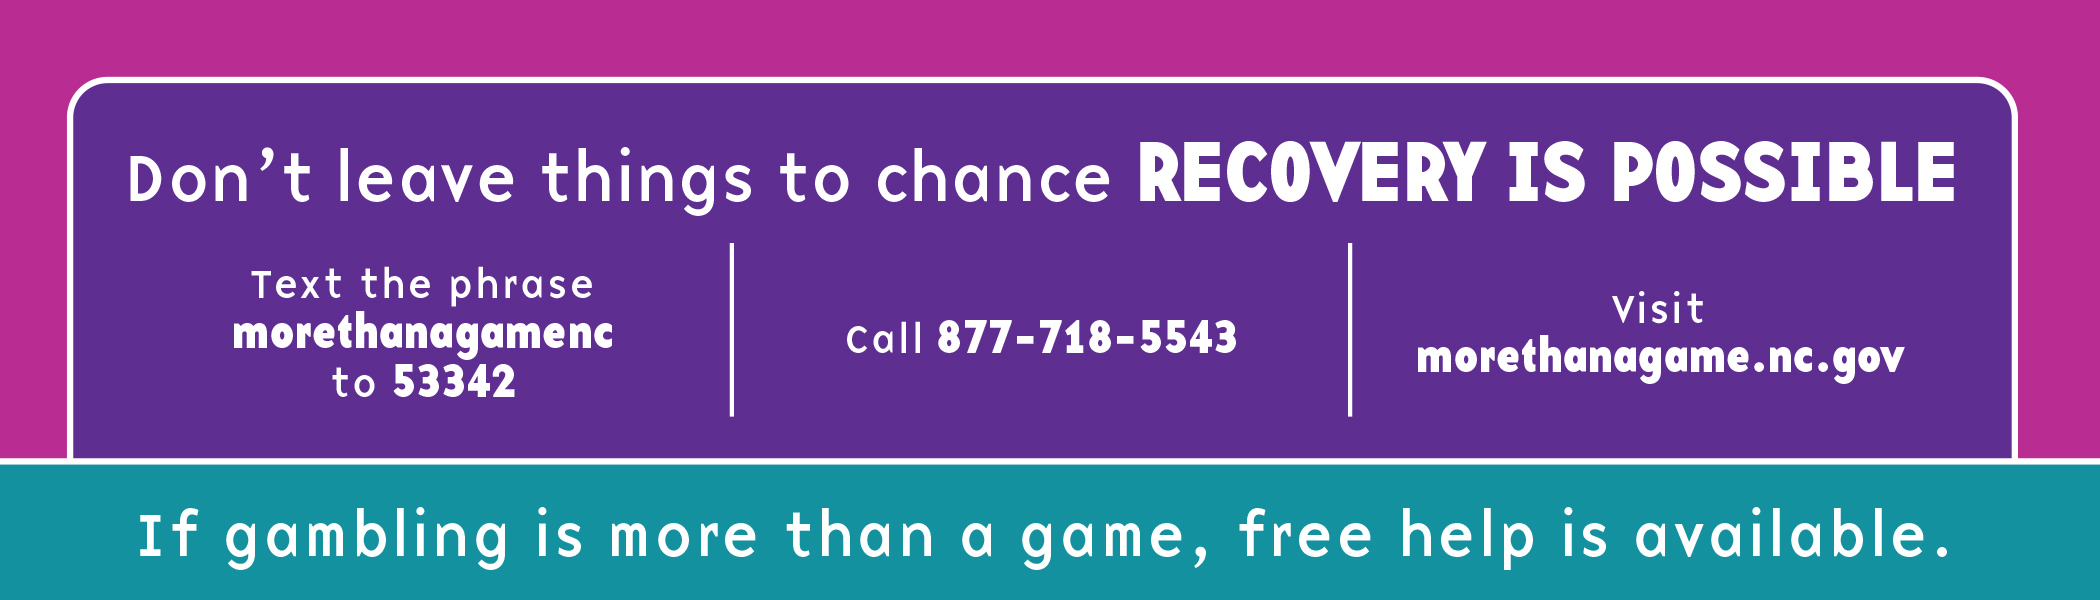 Don't leave things to chance, recovery is possible.